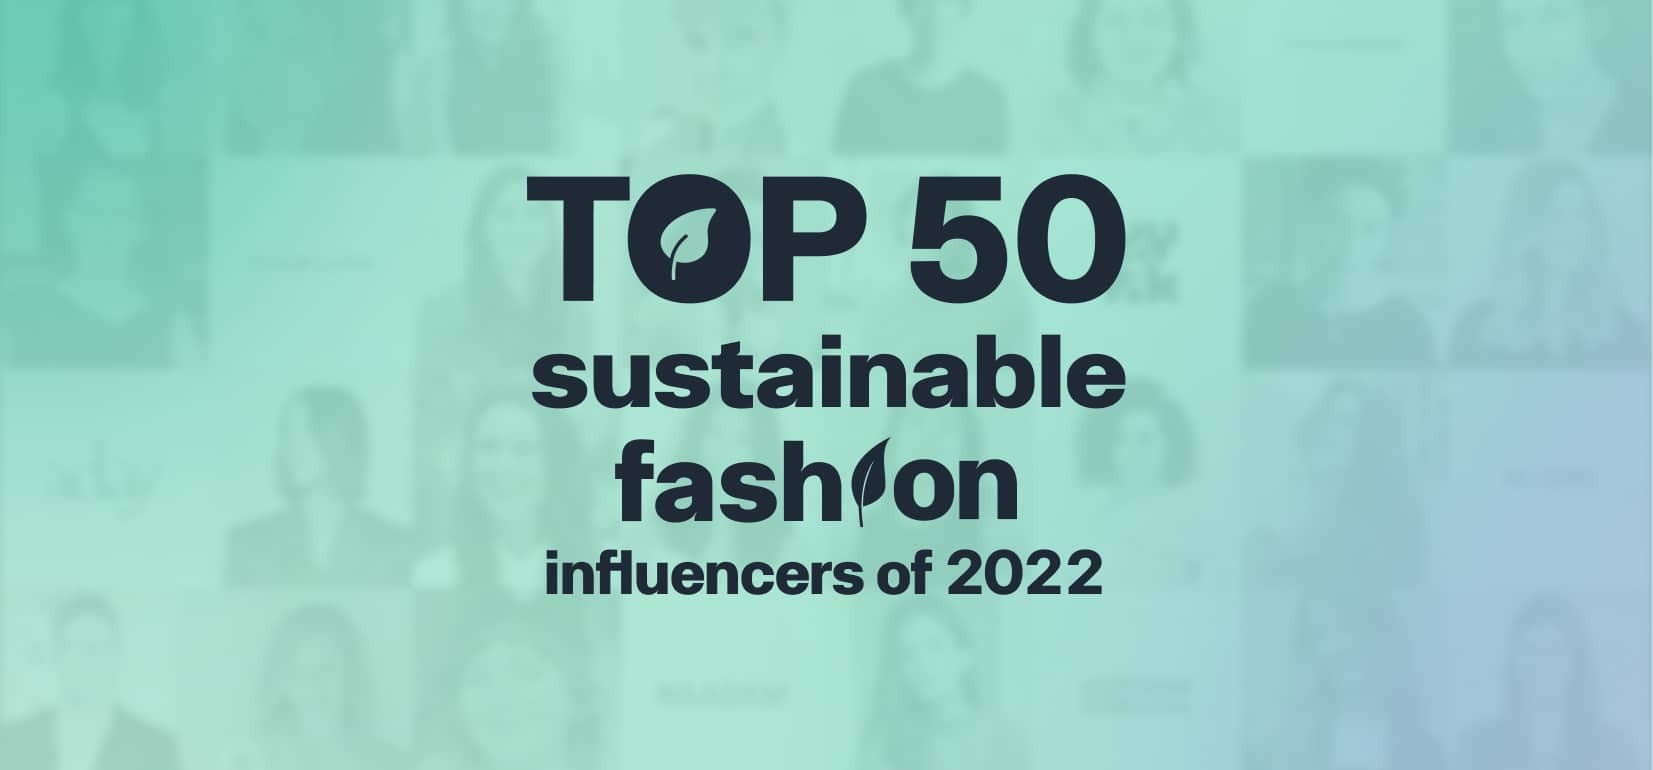 TOP 50 sustainable fashion influencers